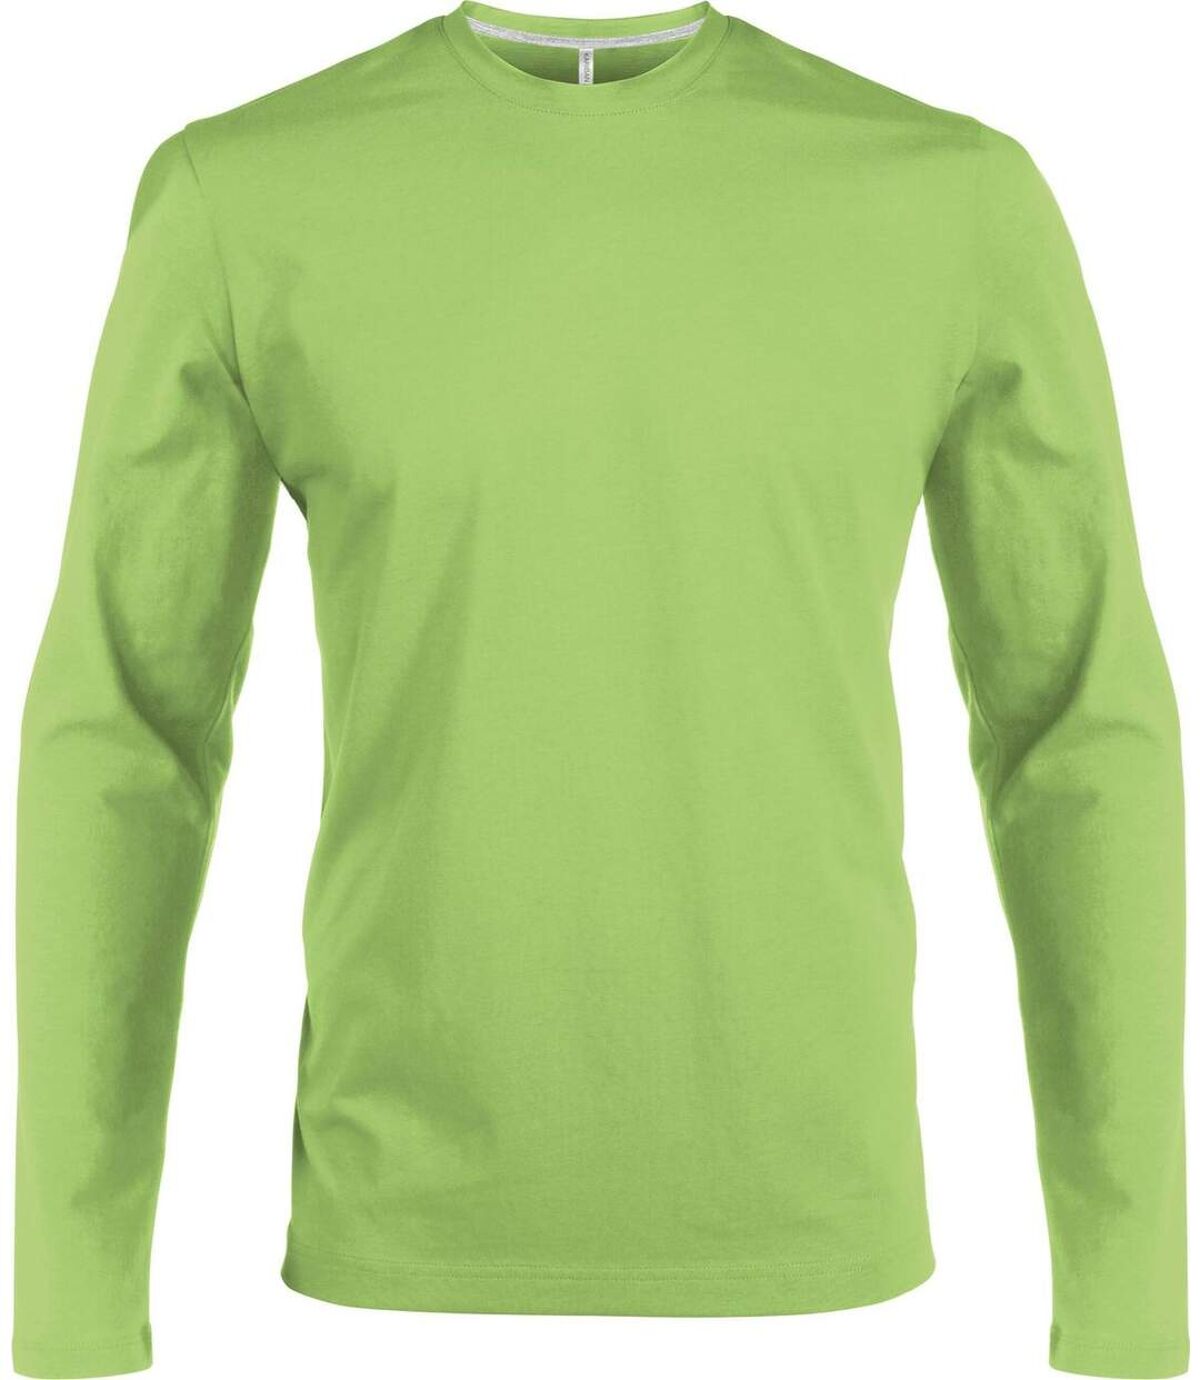 T-shirt manches longues col rond - K359 - vert lime - homme